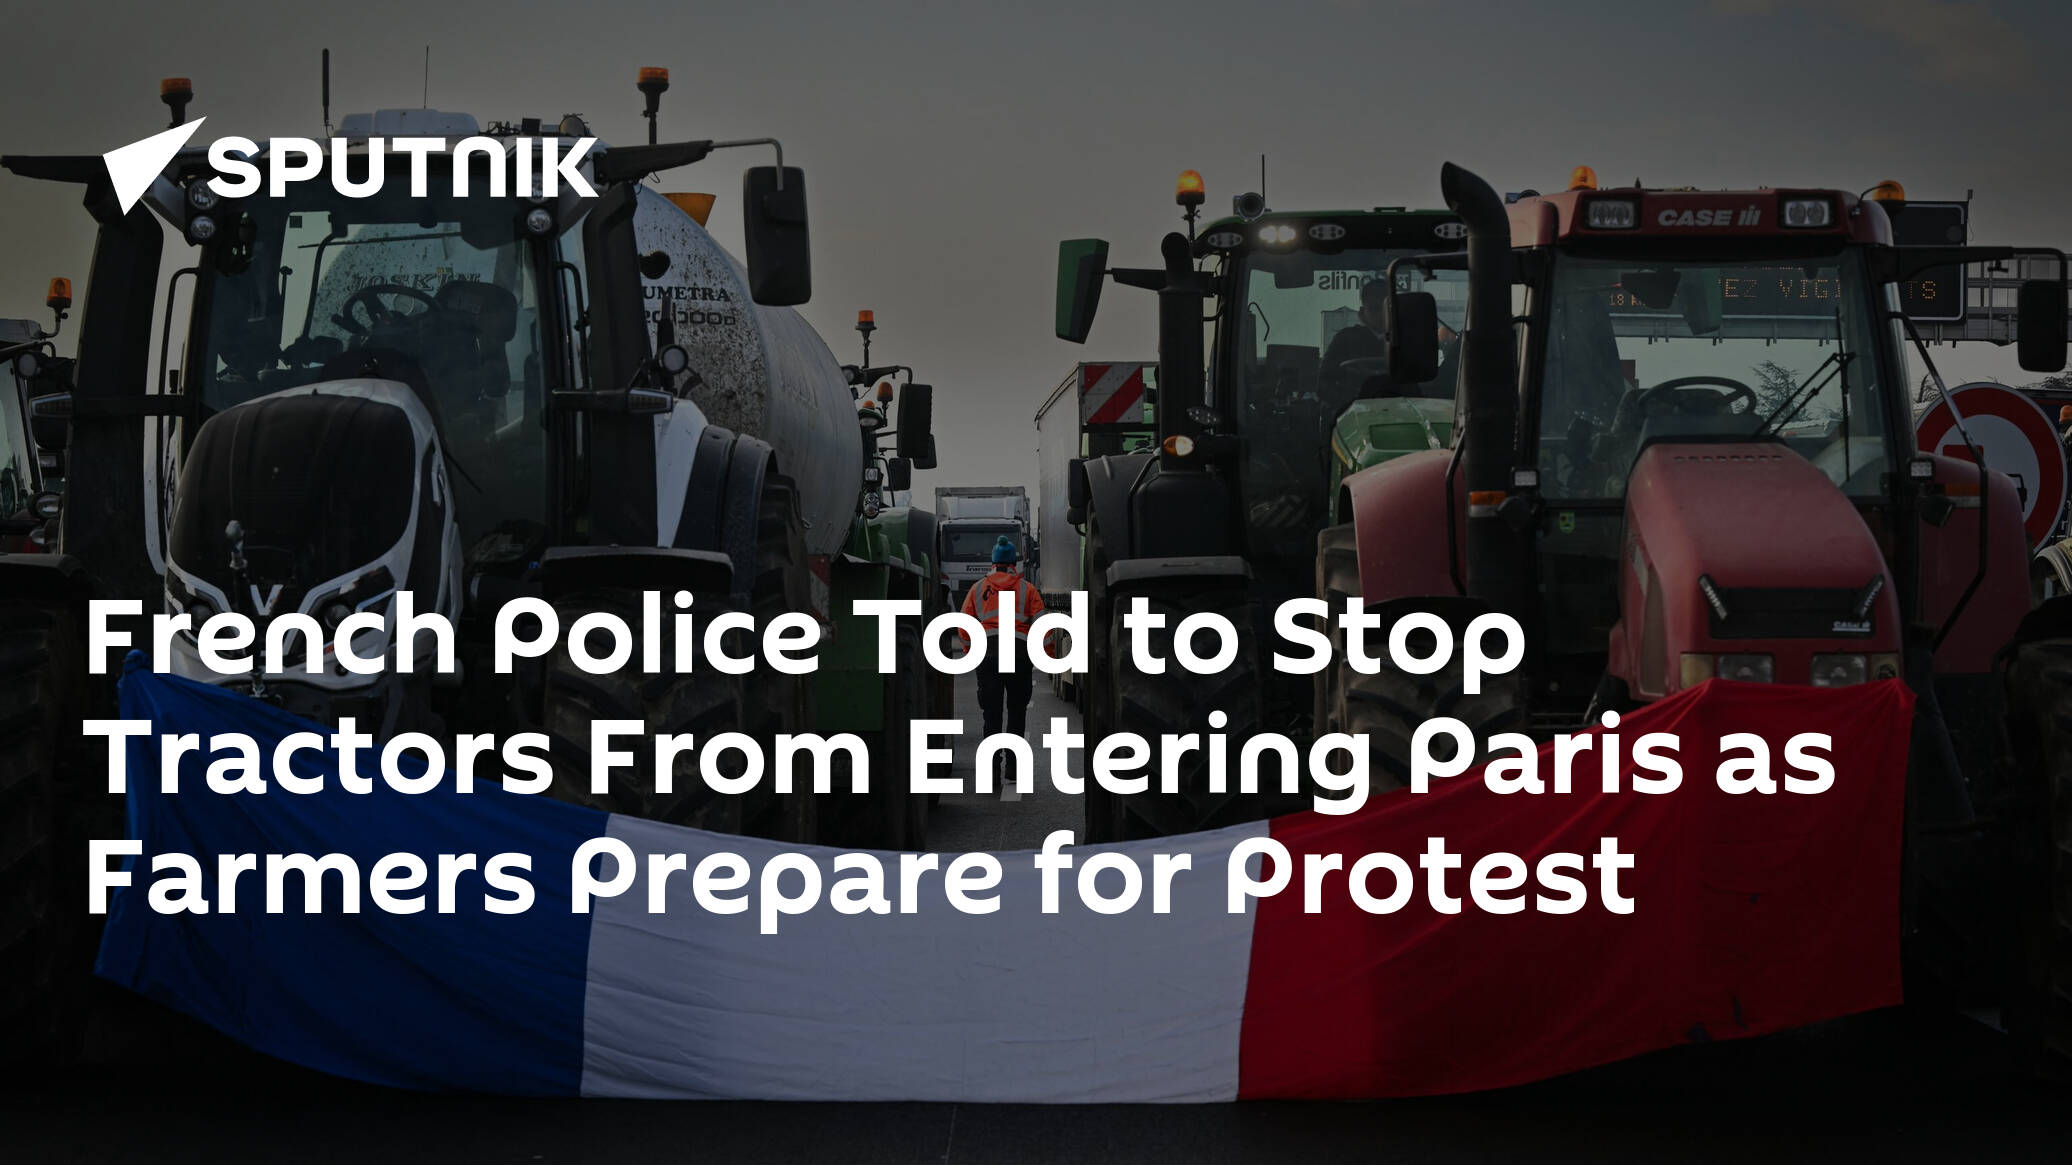 French Police Told to Stop Tractors From Entering Paris as Farmers Prepare for Protest